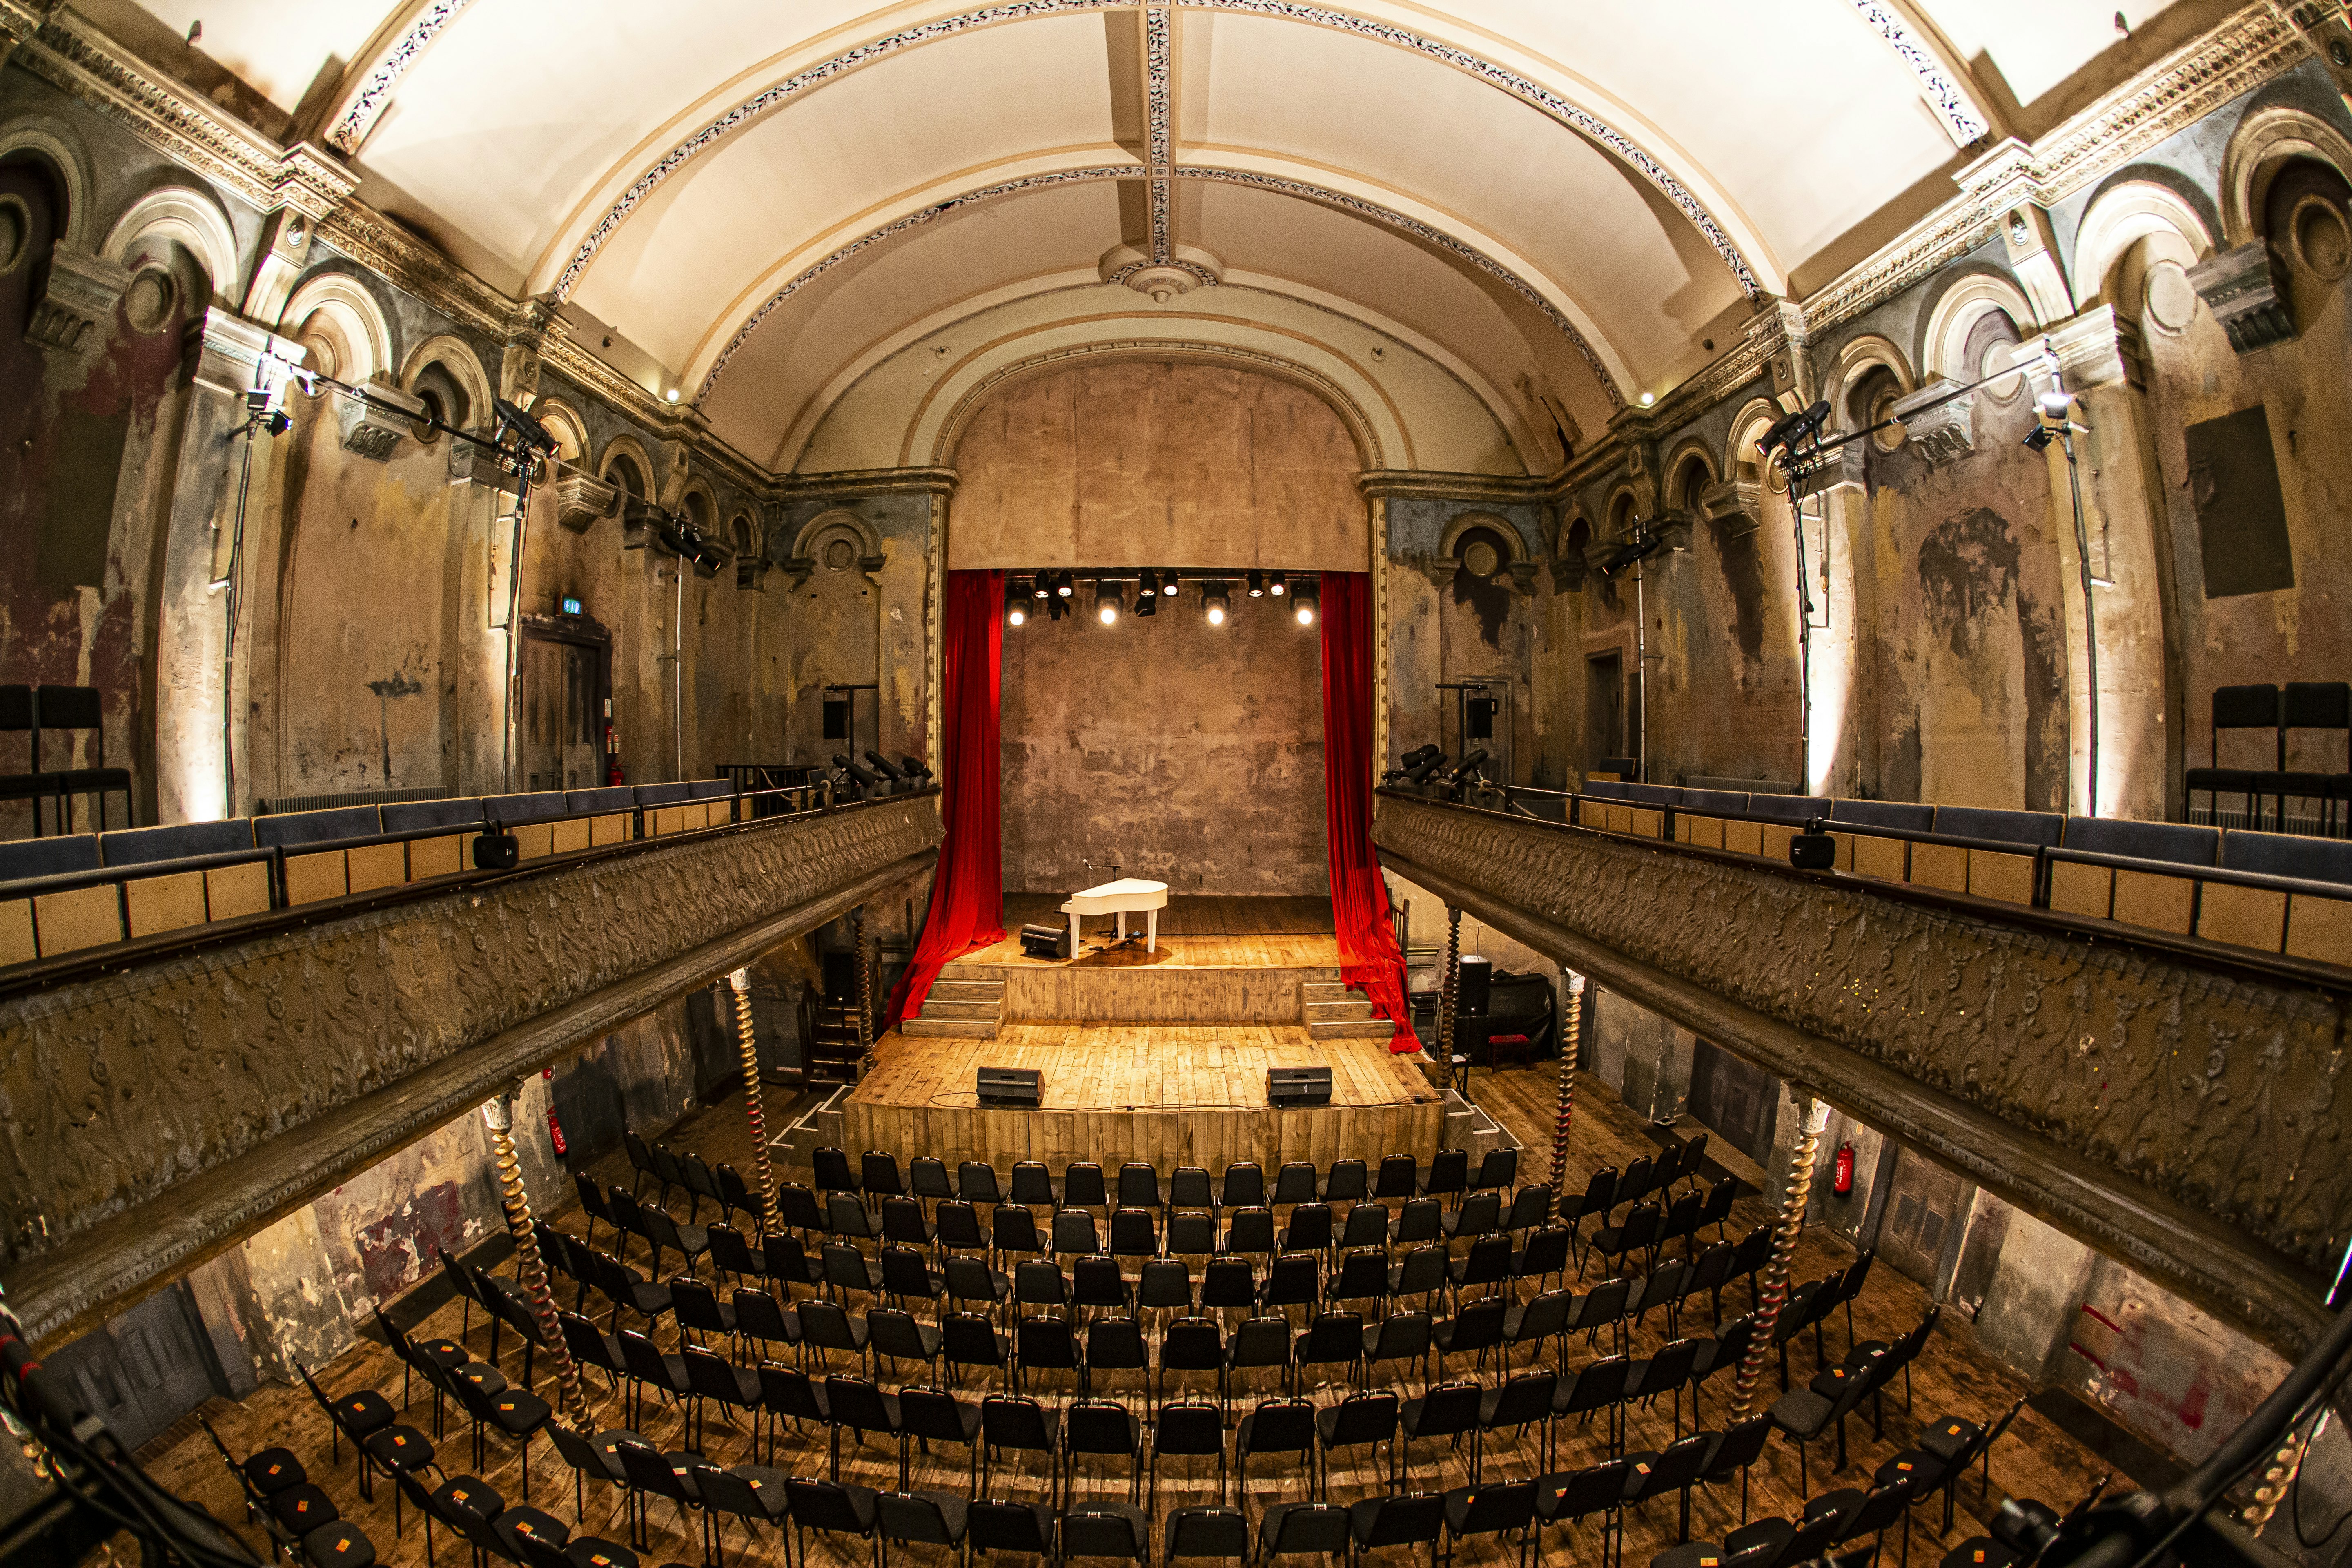 Inside Wilton's Music Hall; the image has been taken with a fish-eye lens from a balcony and looks down on chairs set up for a concert.